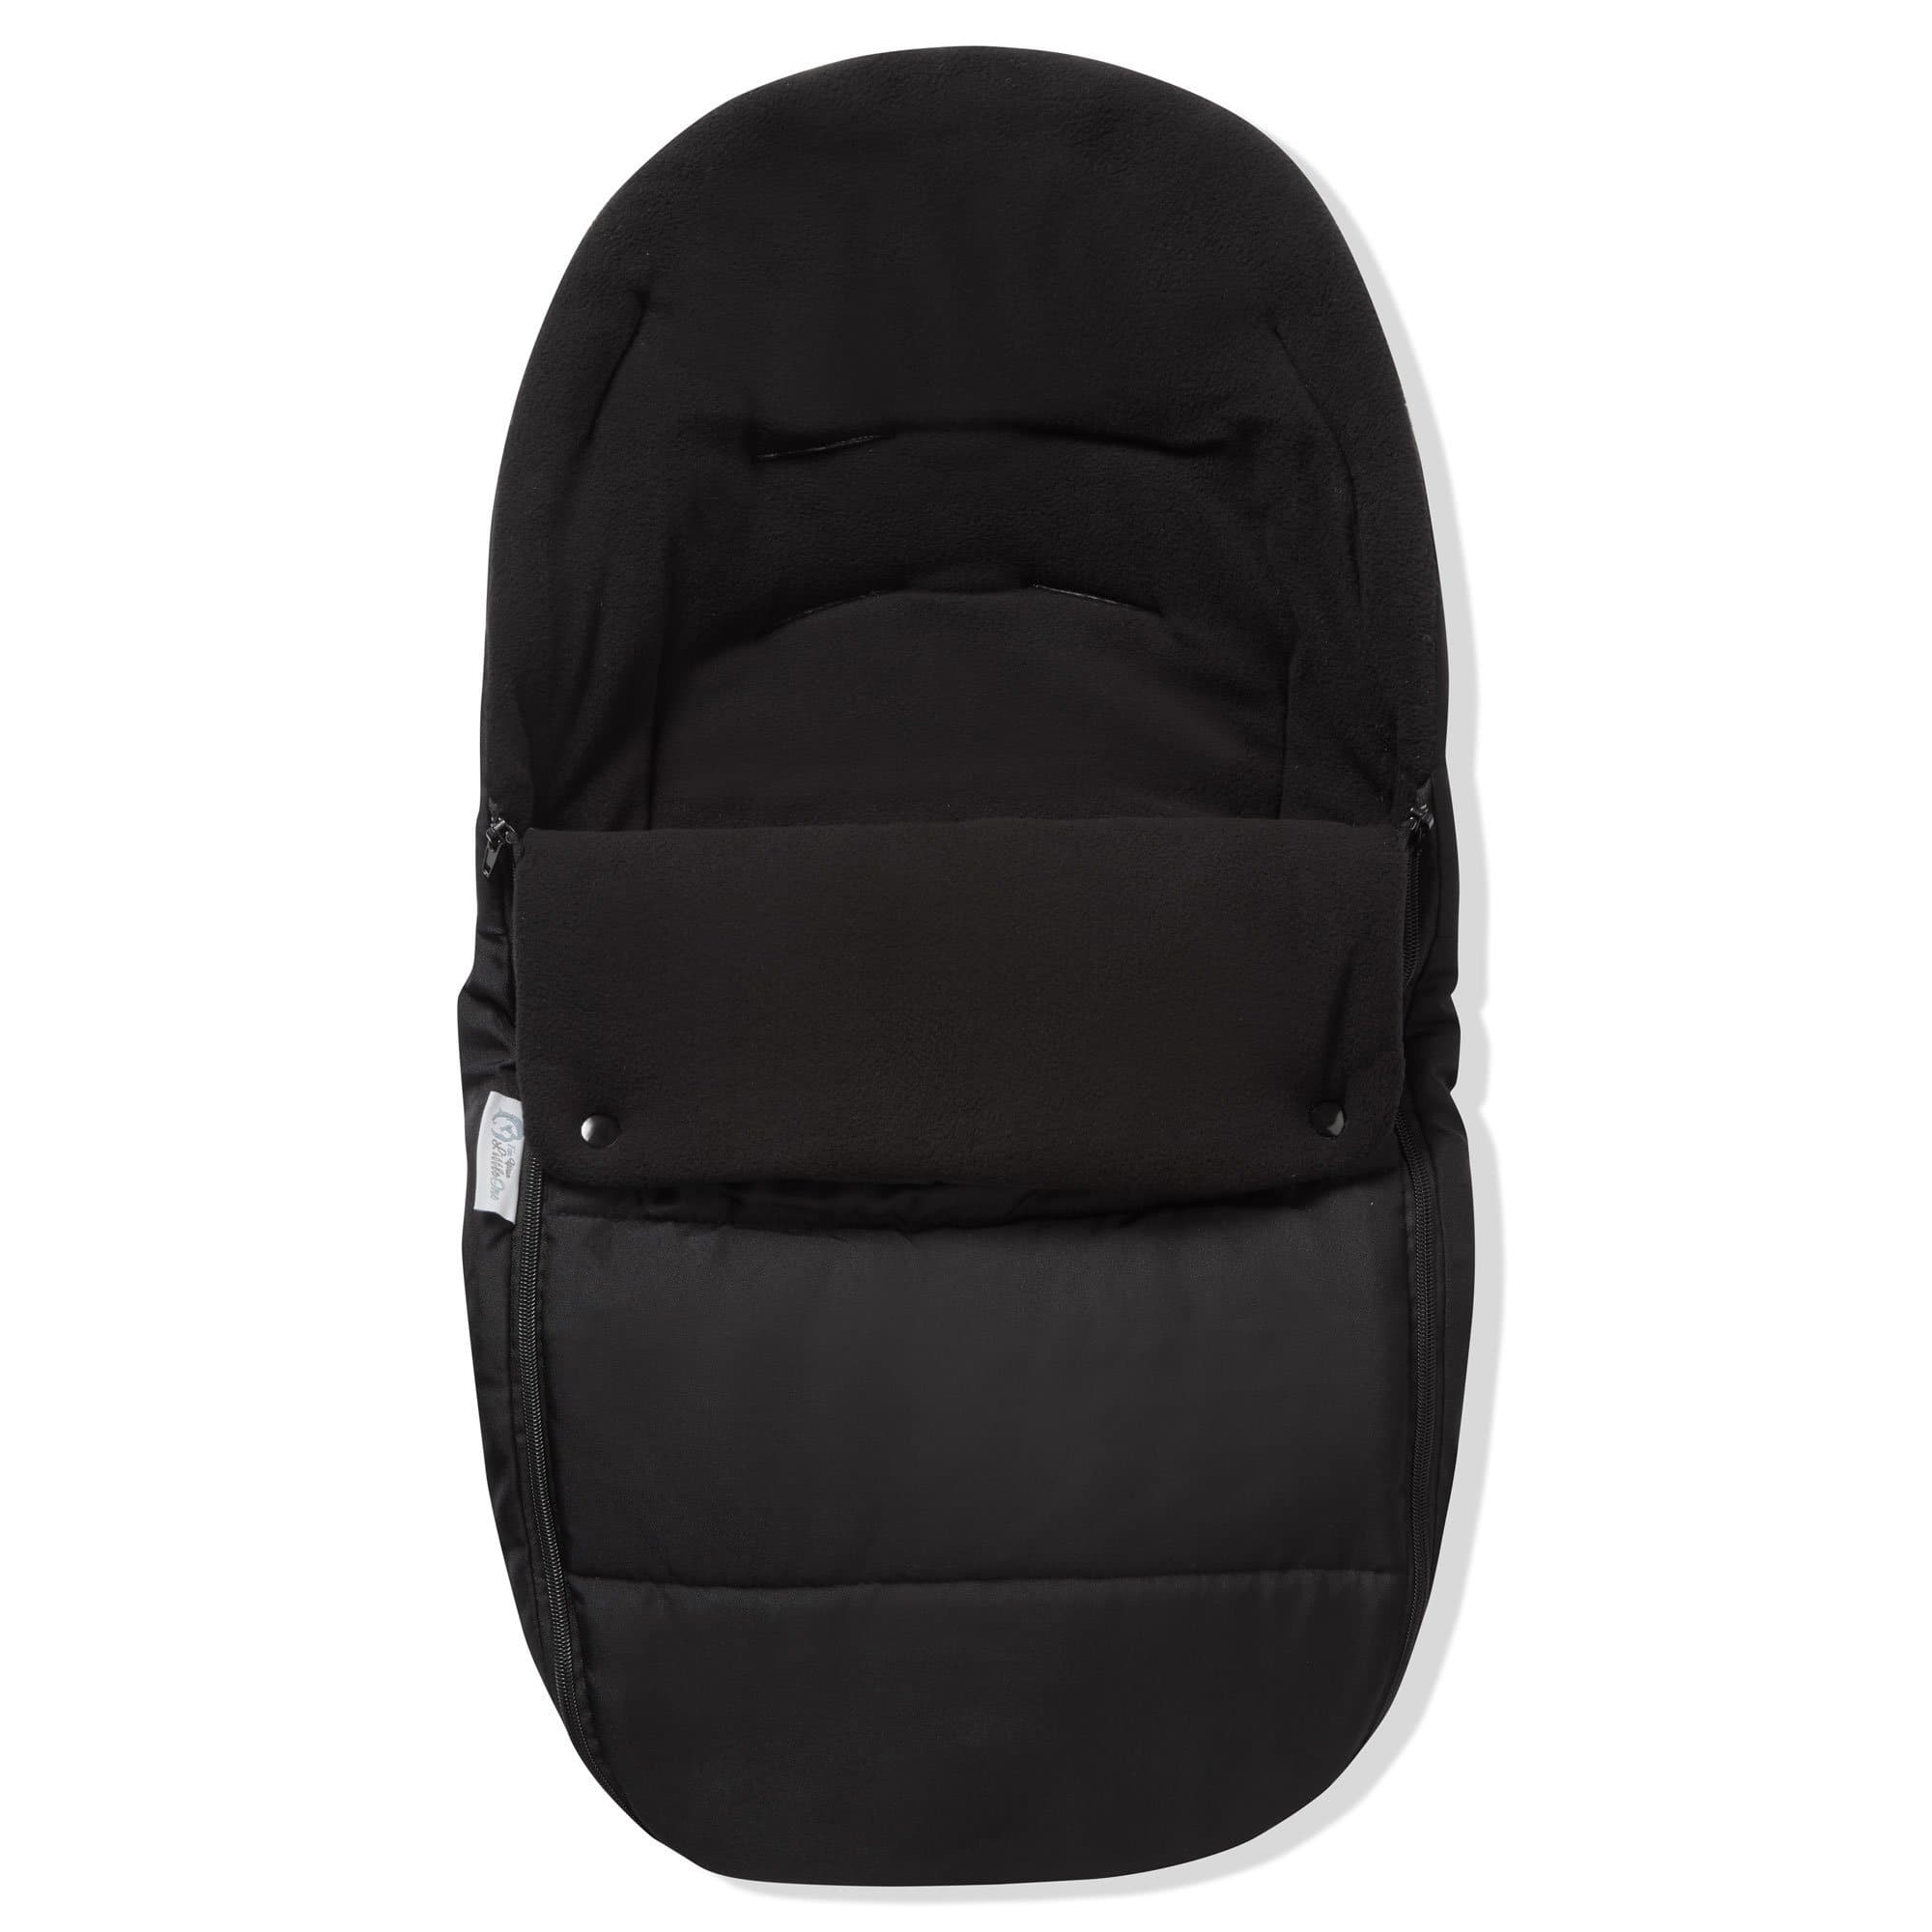 Premium Car Seat Footmuff / Cosy Toes Compatible with Cybex - Black Jack / Fits All Models | For Your Little One